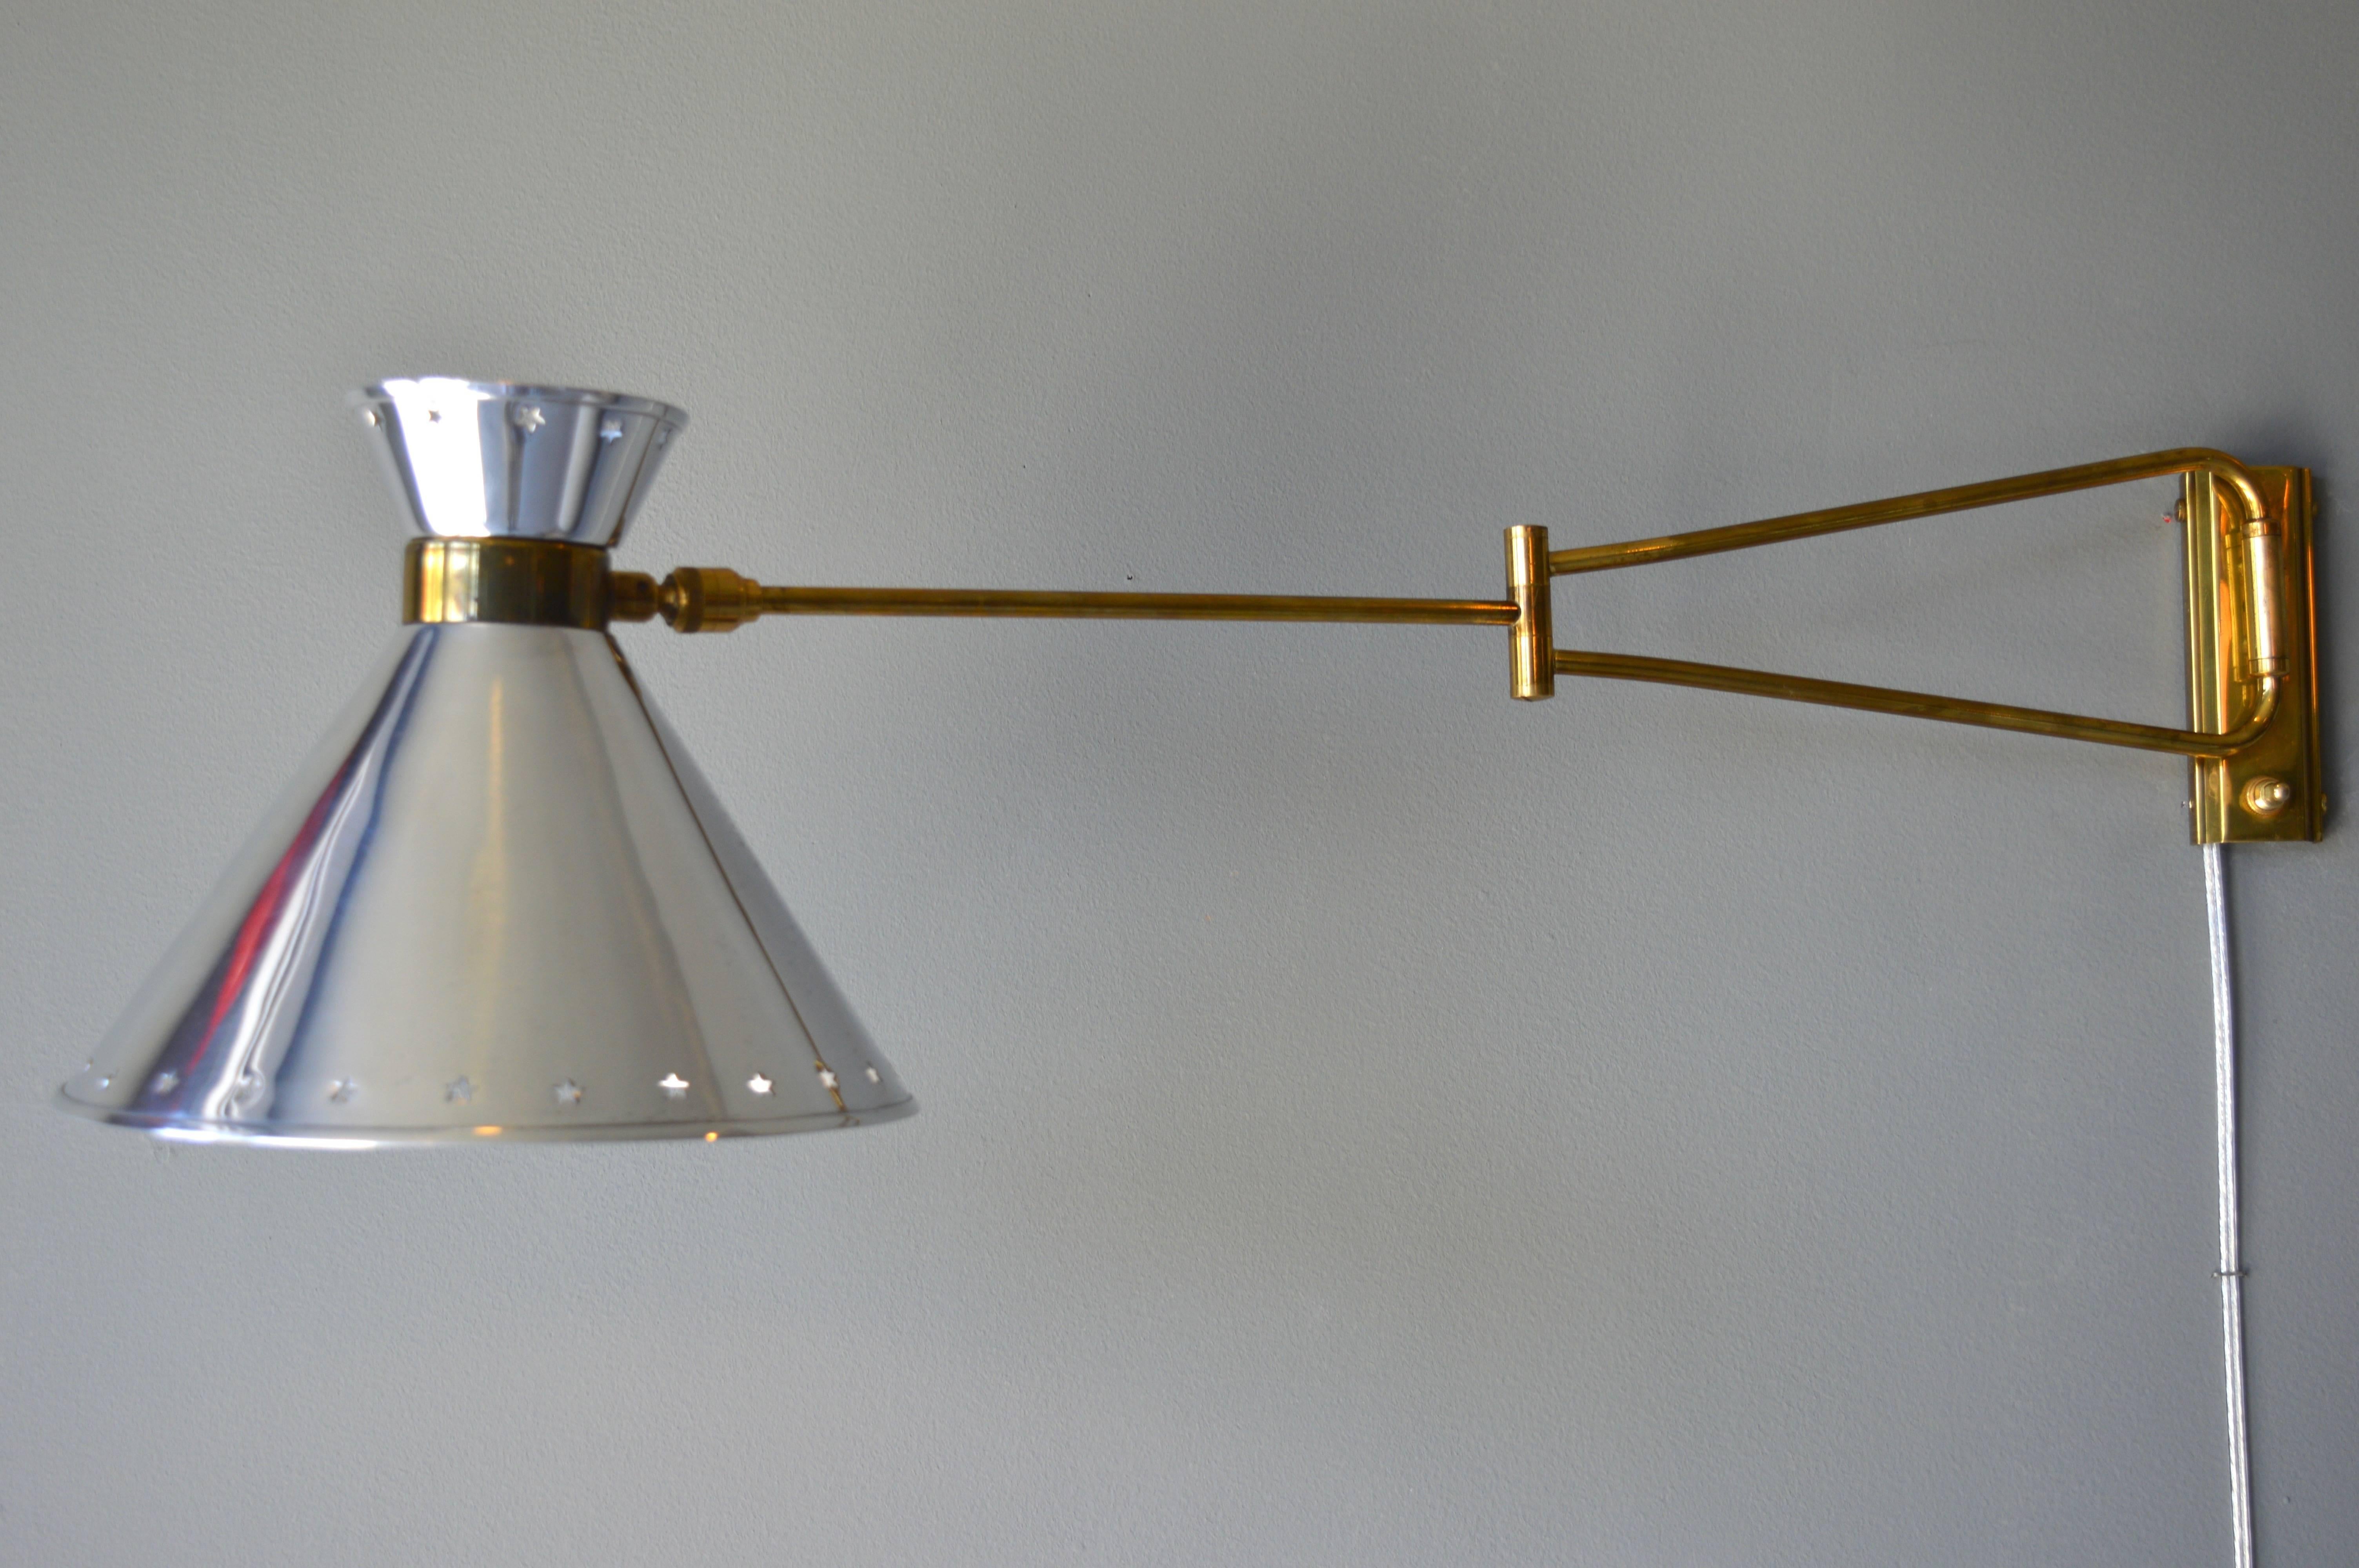 Fantastic articulating sconce by Lunel. Polished aluminum shade with brass backplate, arms and hardware. Newly rewired. Excellent vintage condition.